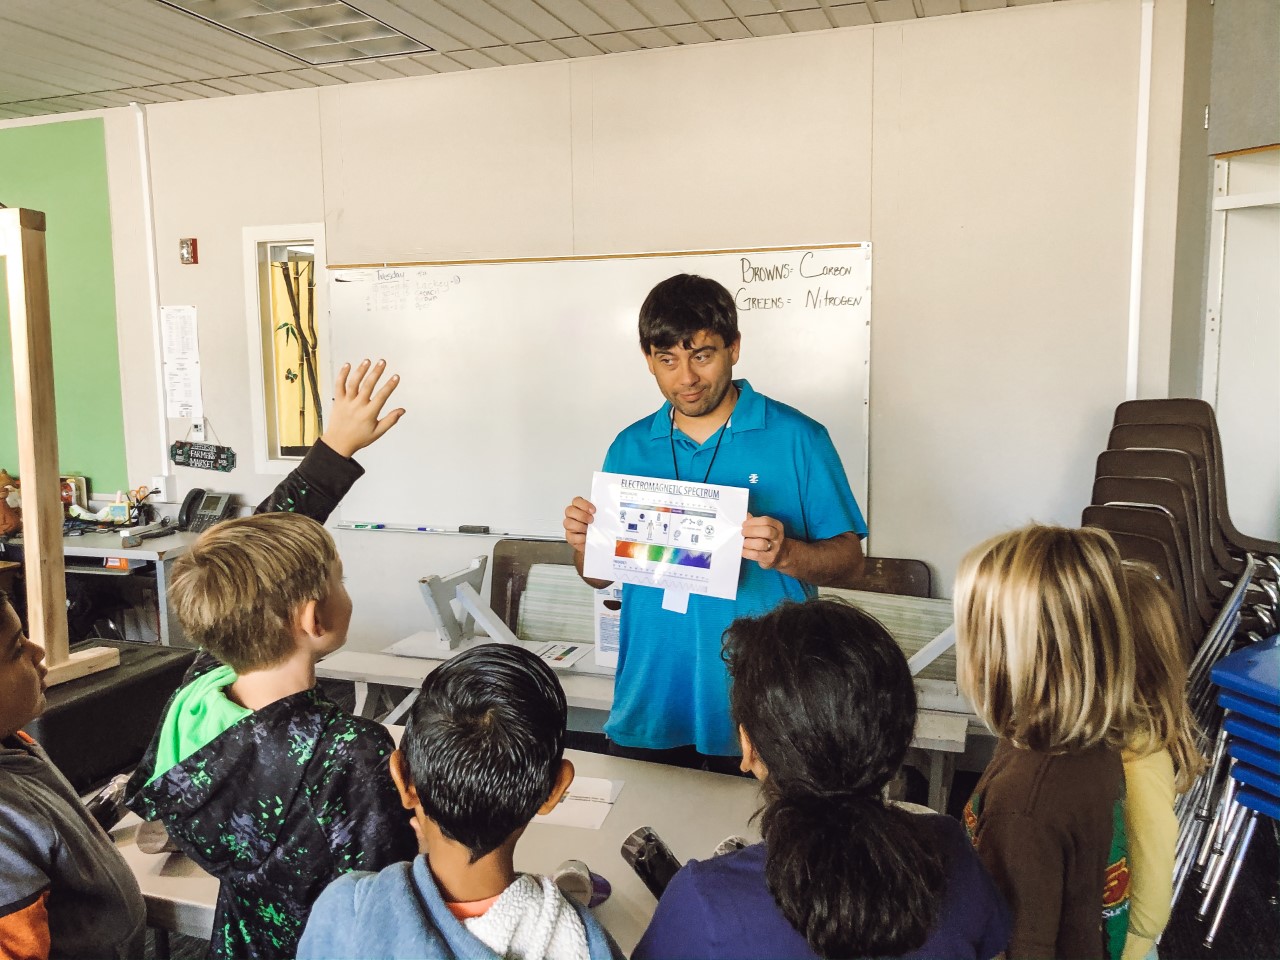 Teacher shows a group of students an illustration on paper about science.